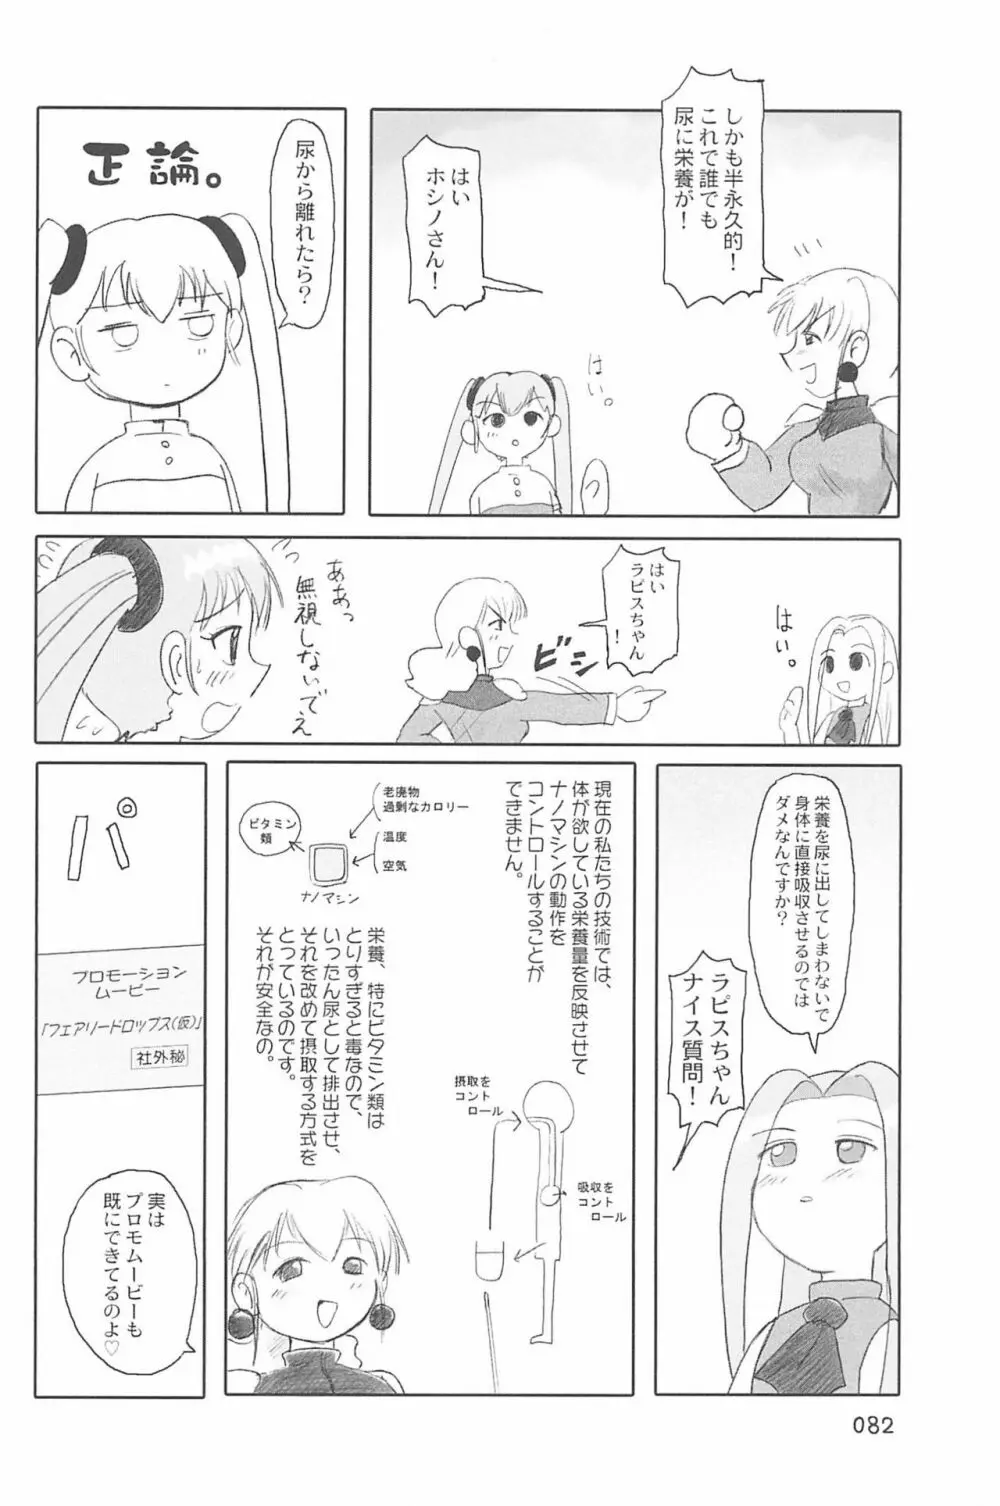 ND-special Volume 4 82ページ